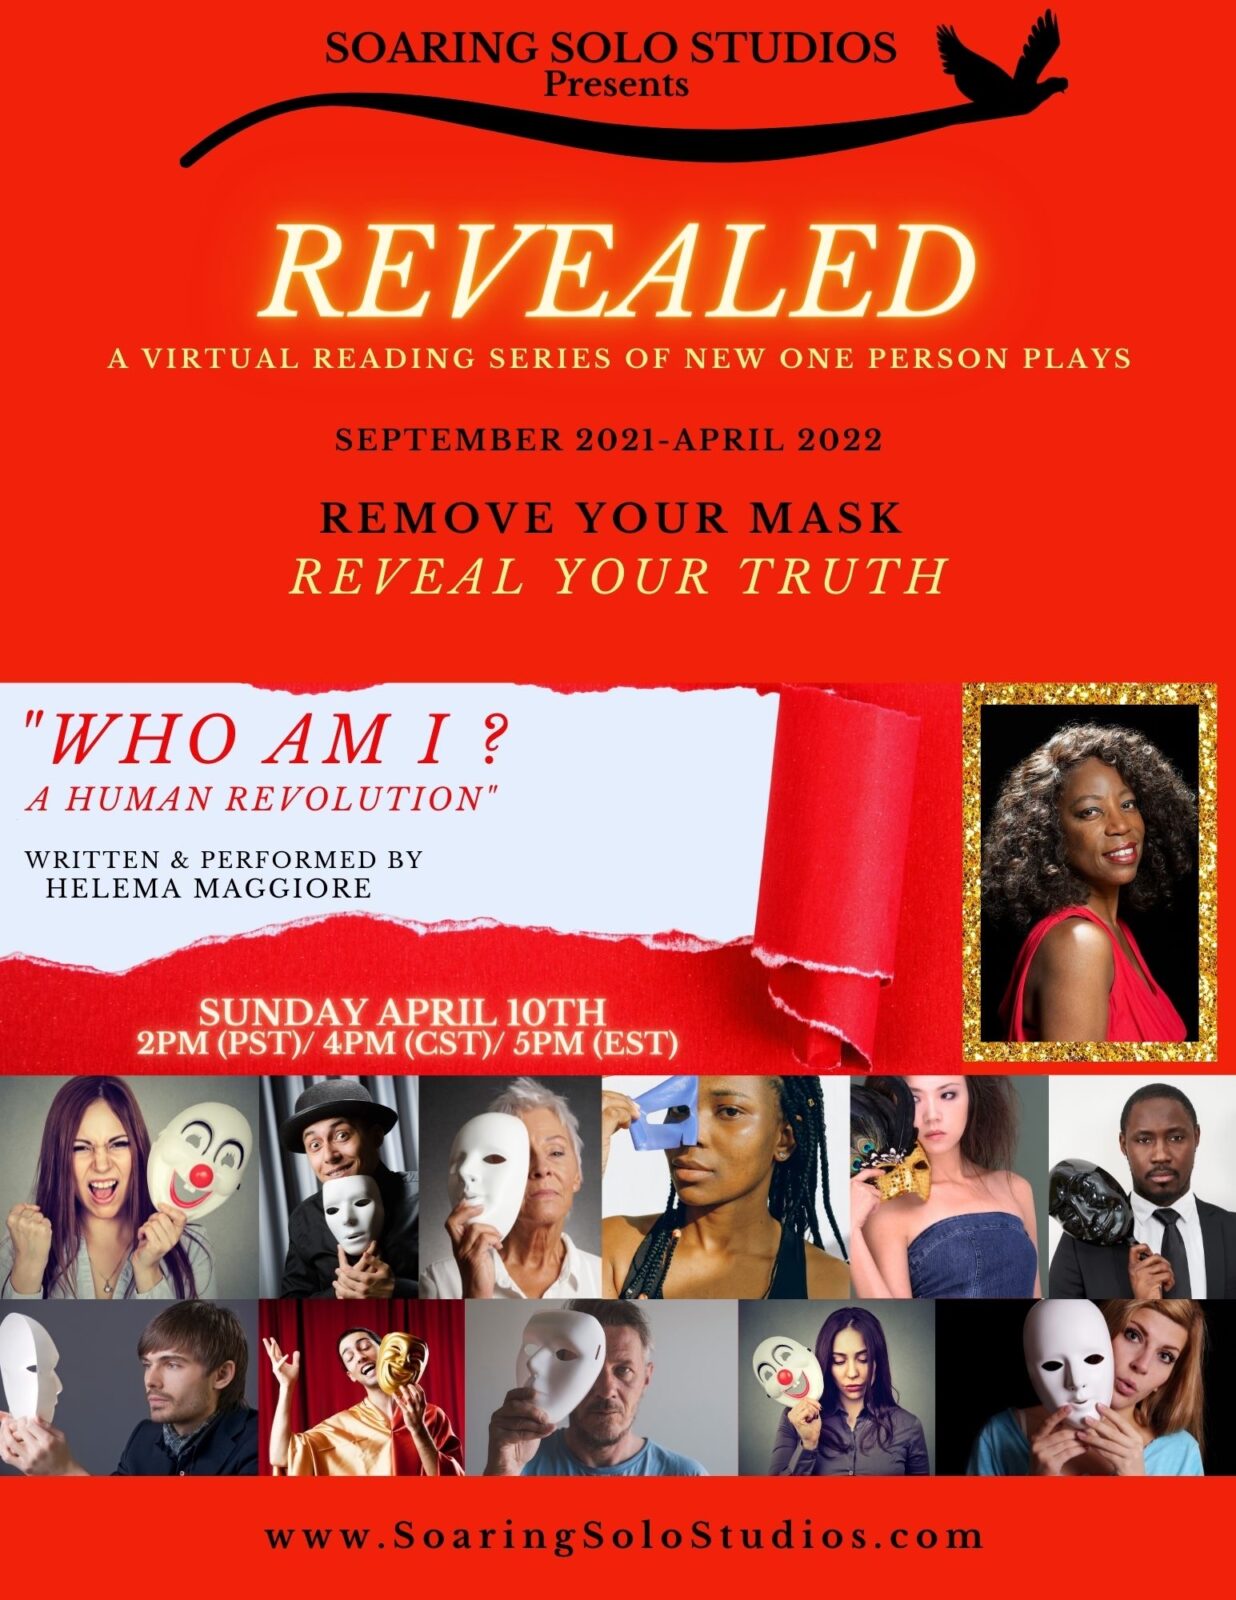 Who Am I? A Human Revolution in REVEALED Virtual Reading Series ...